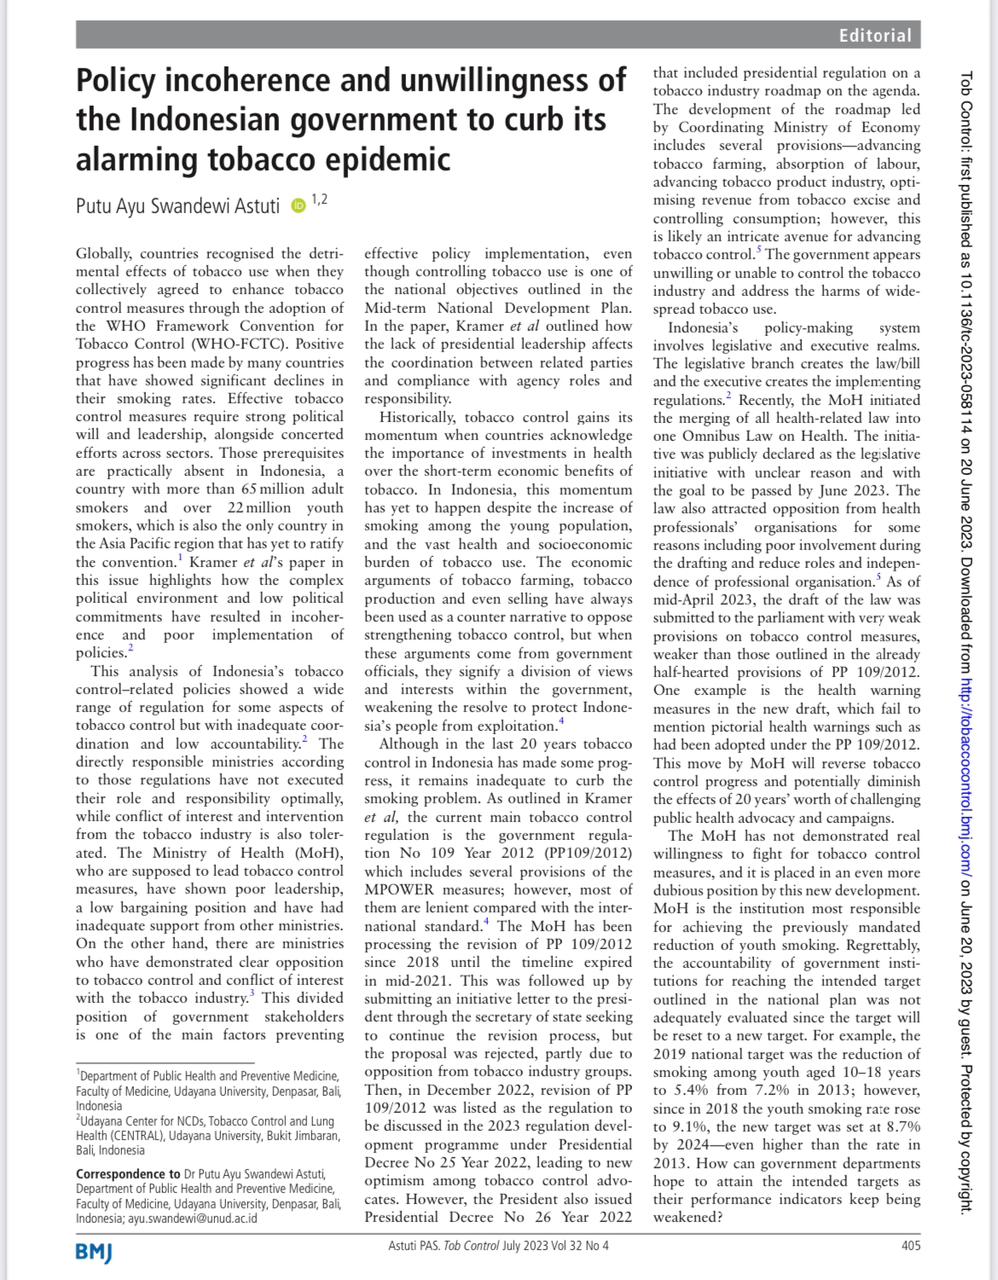 Policy Incoherence and Unwillingness of The Indonesian Government to Curb its Alarming Tobacco Epidemic